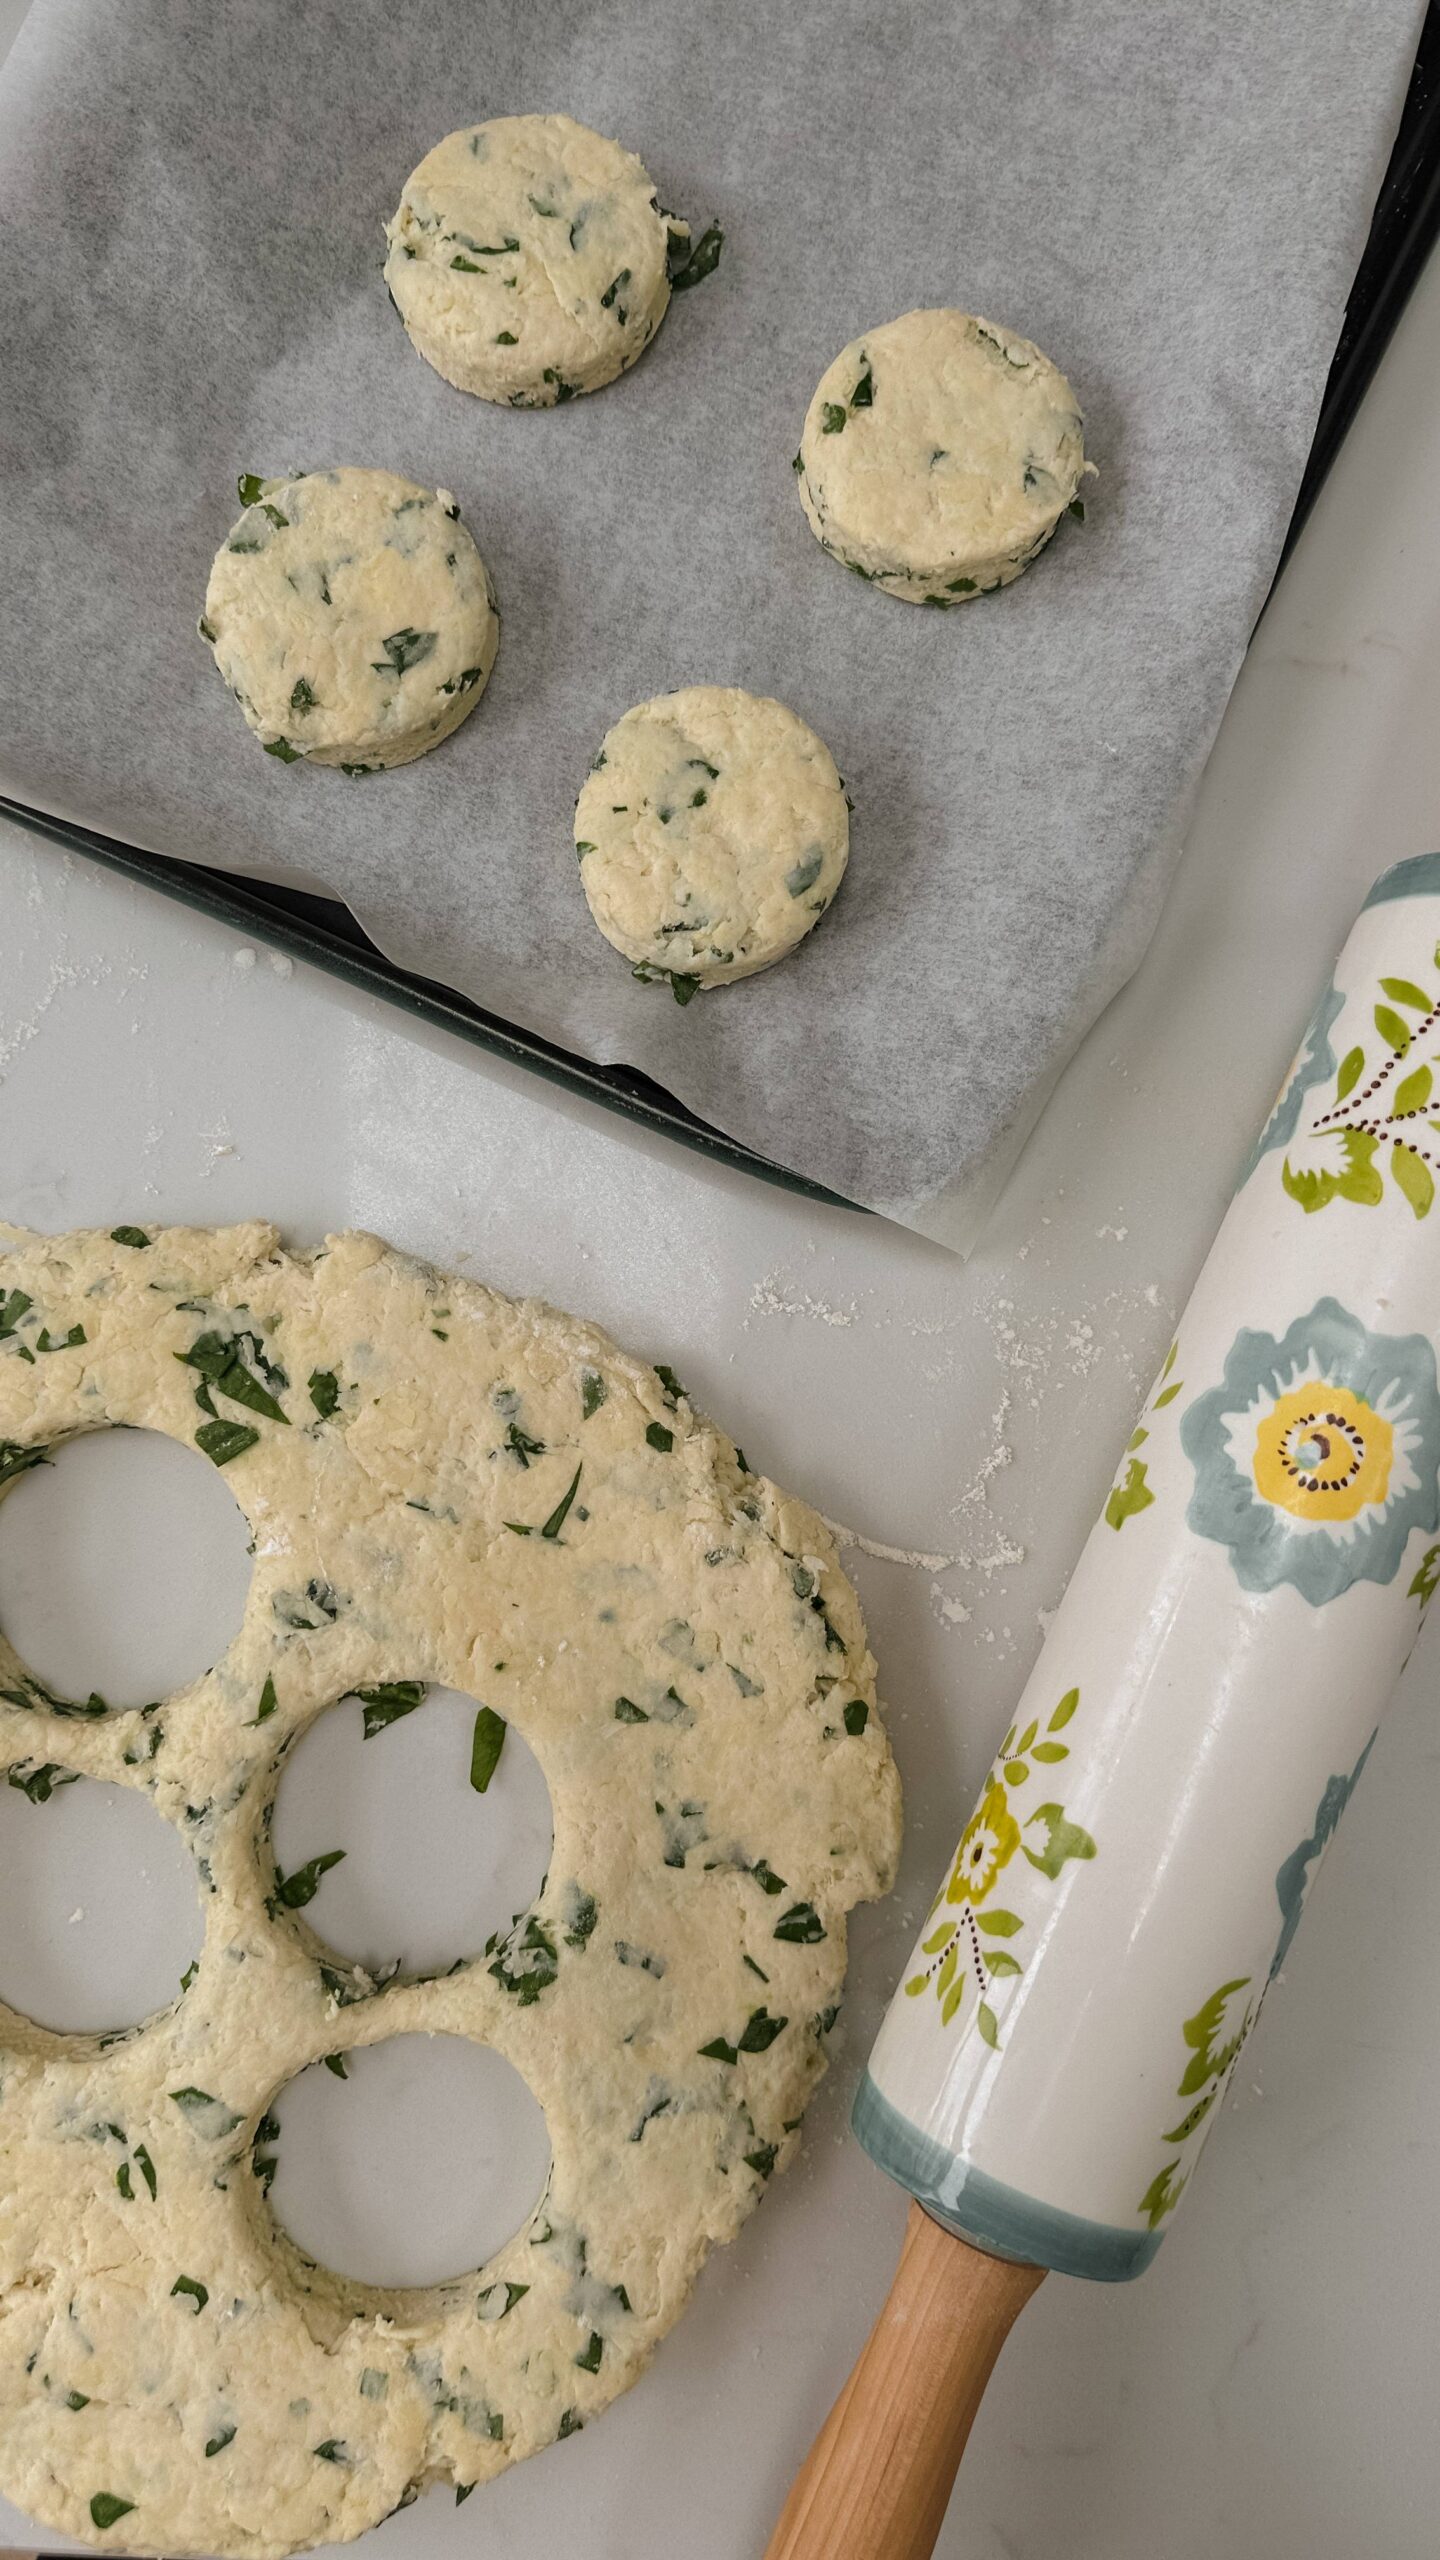 Cutting out savoury scones